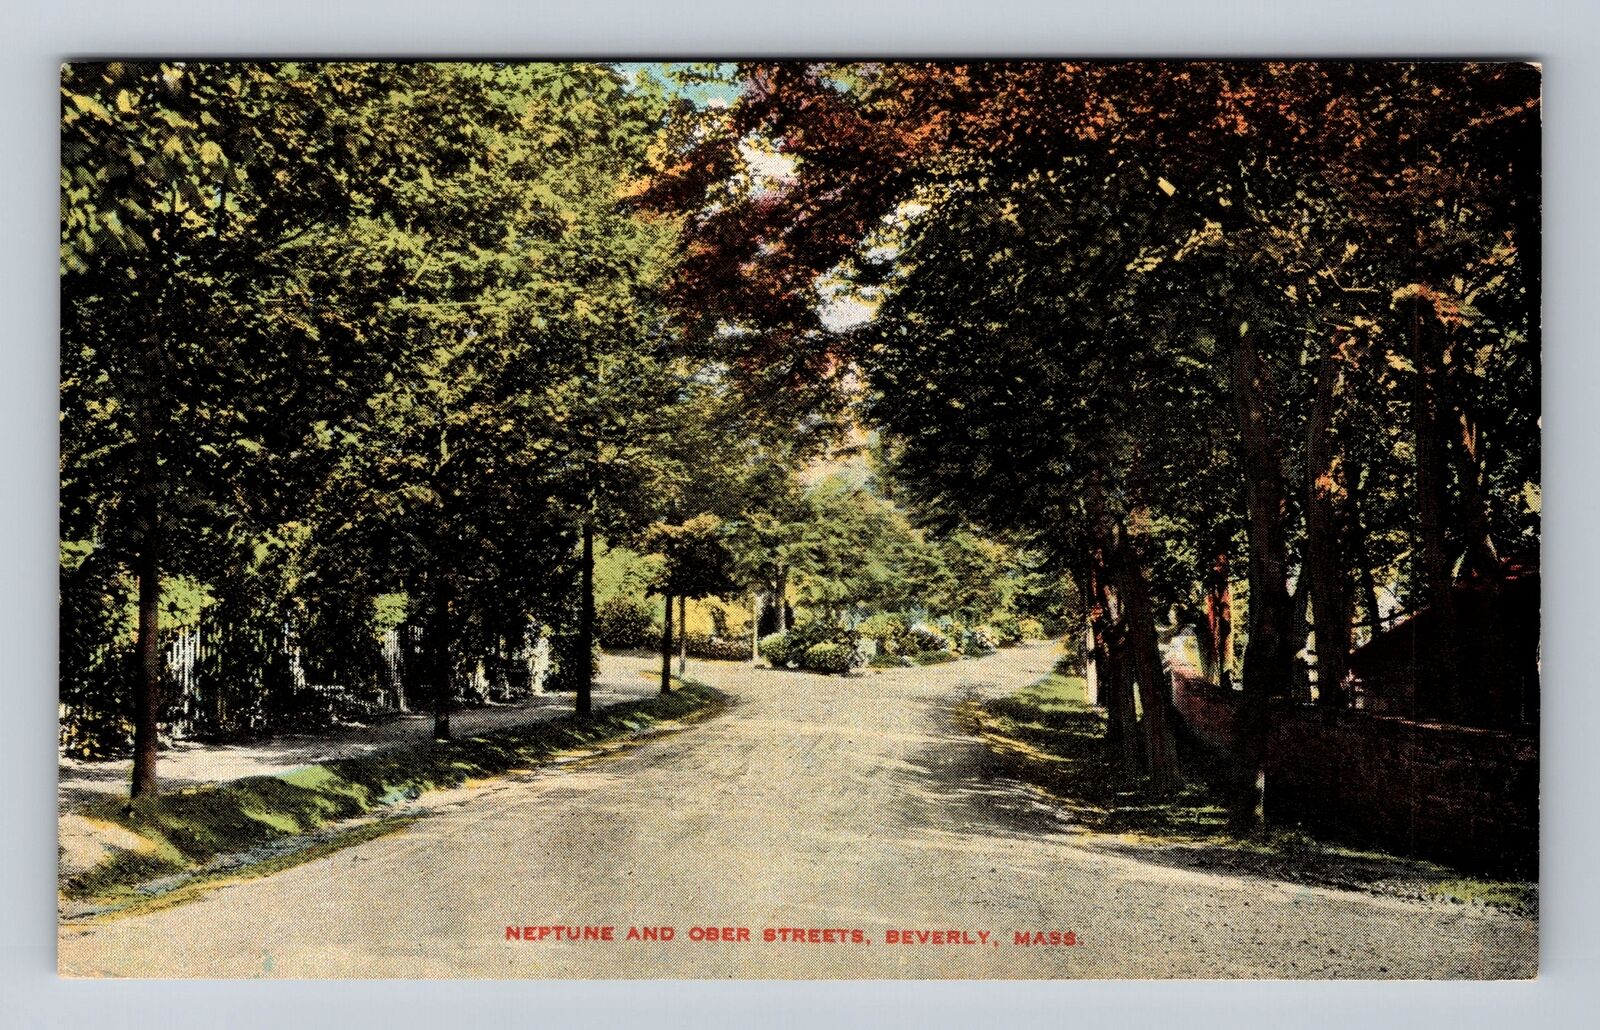 Beverly MA-Massachusetts, Neptune and Ober Streets, Souvenir Vintage Postcard